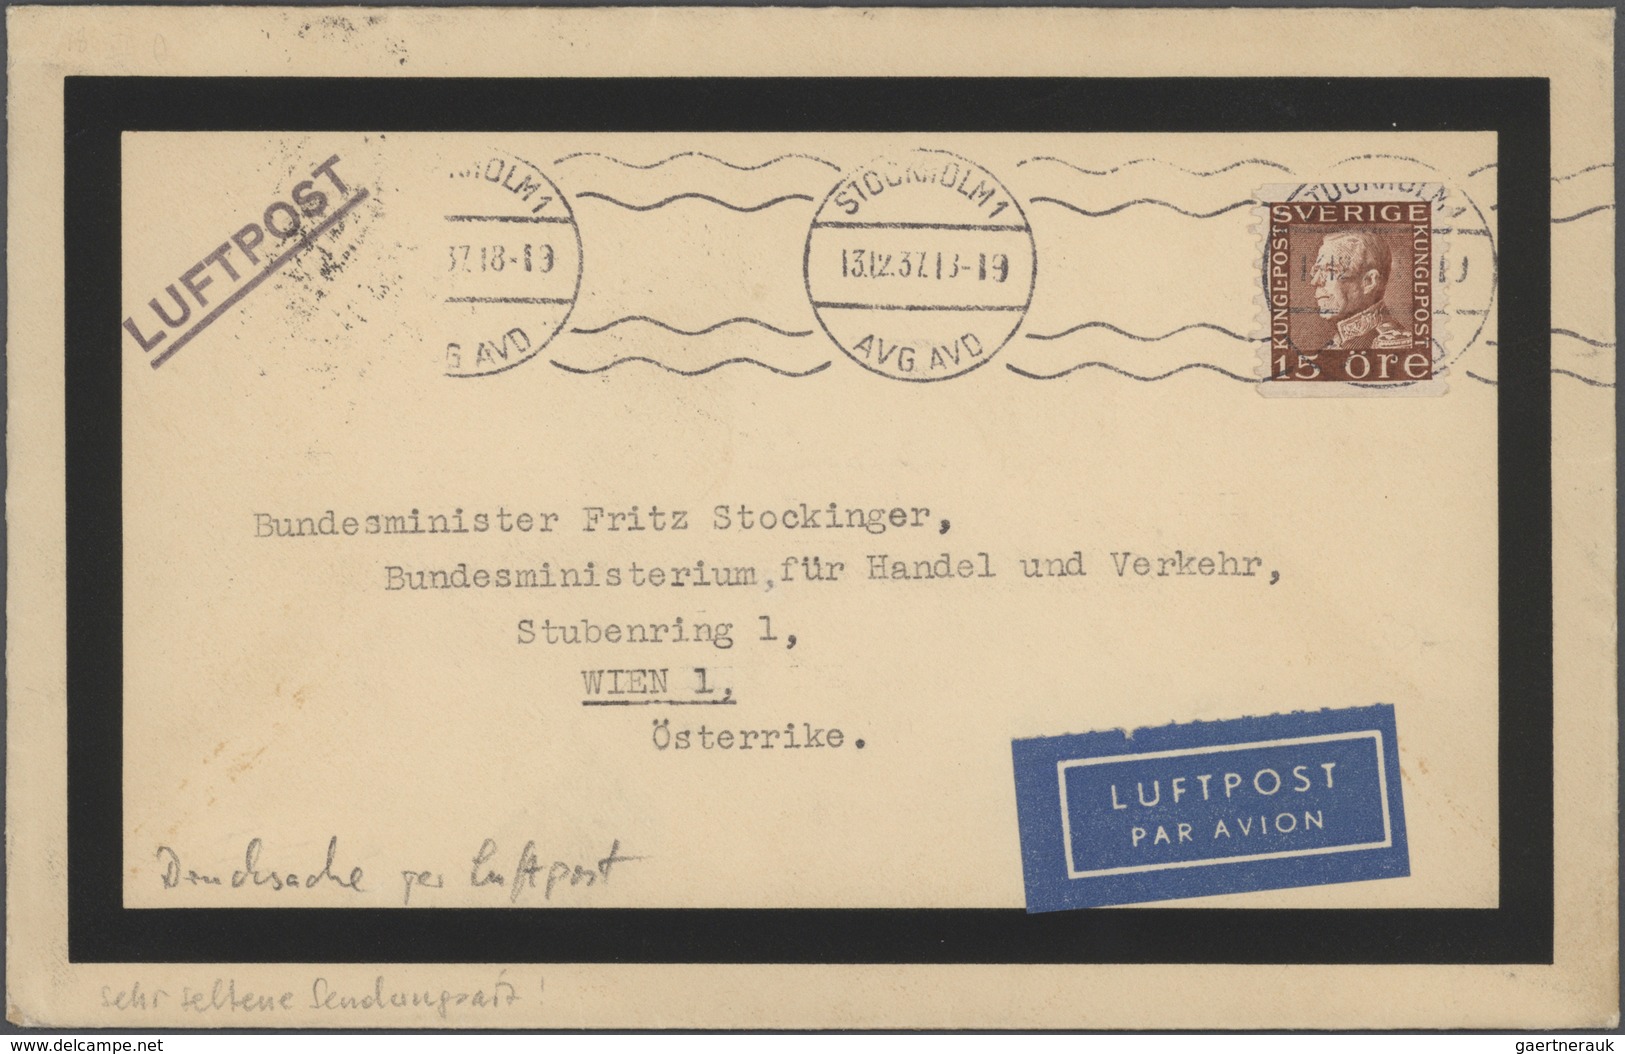 27963 Schweden: 1722/1960, interesting lot of ca. 55 better covers and 9 regulations for post offices (172